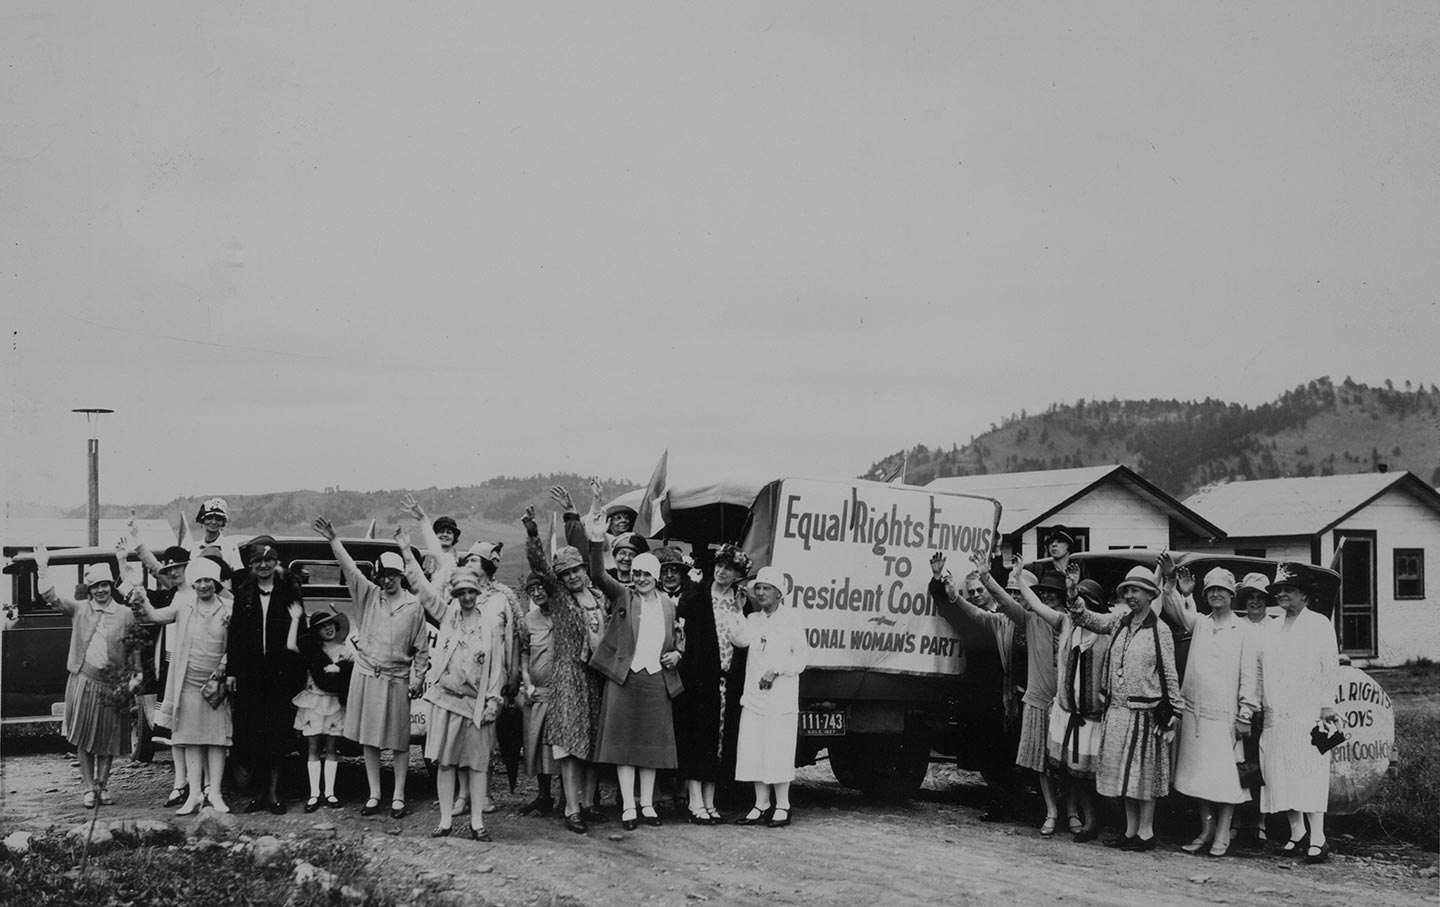 National Woman's Party envoys, 1927